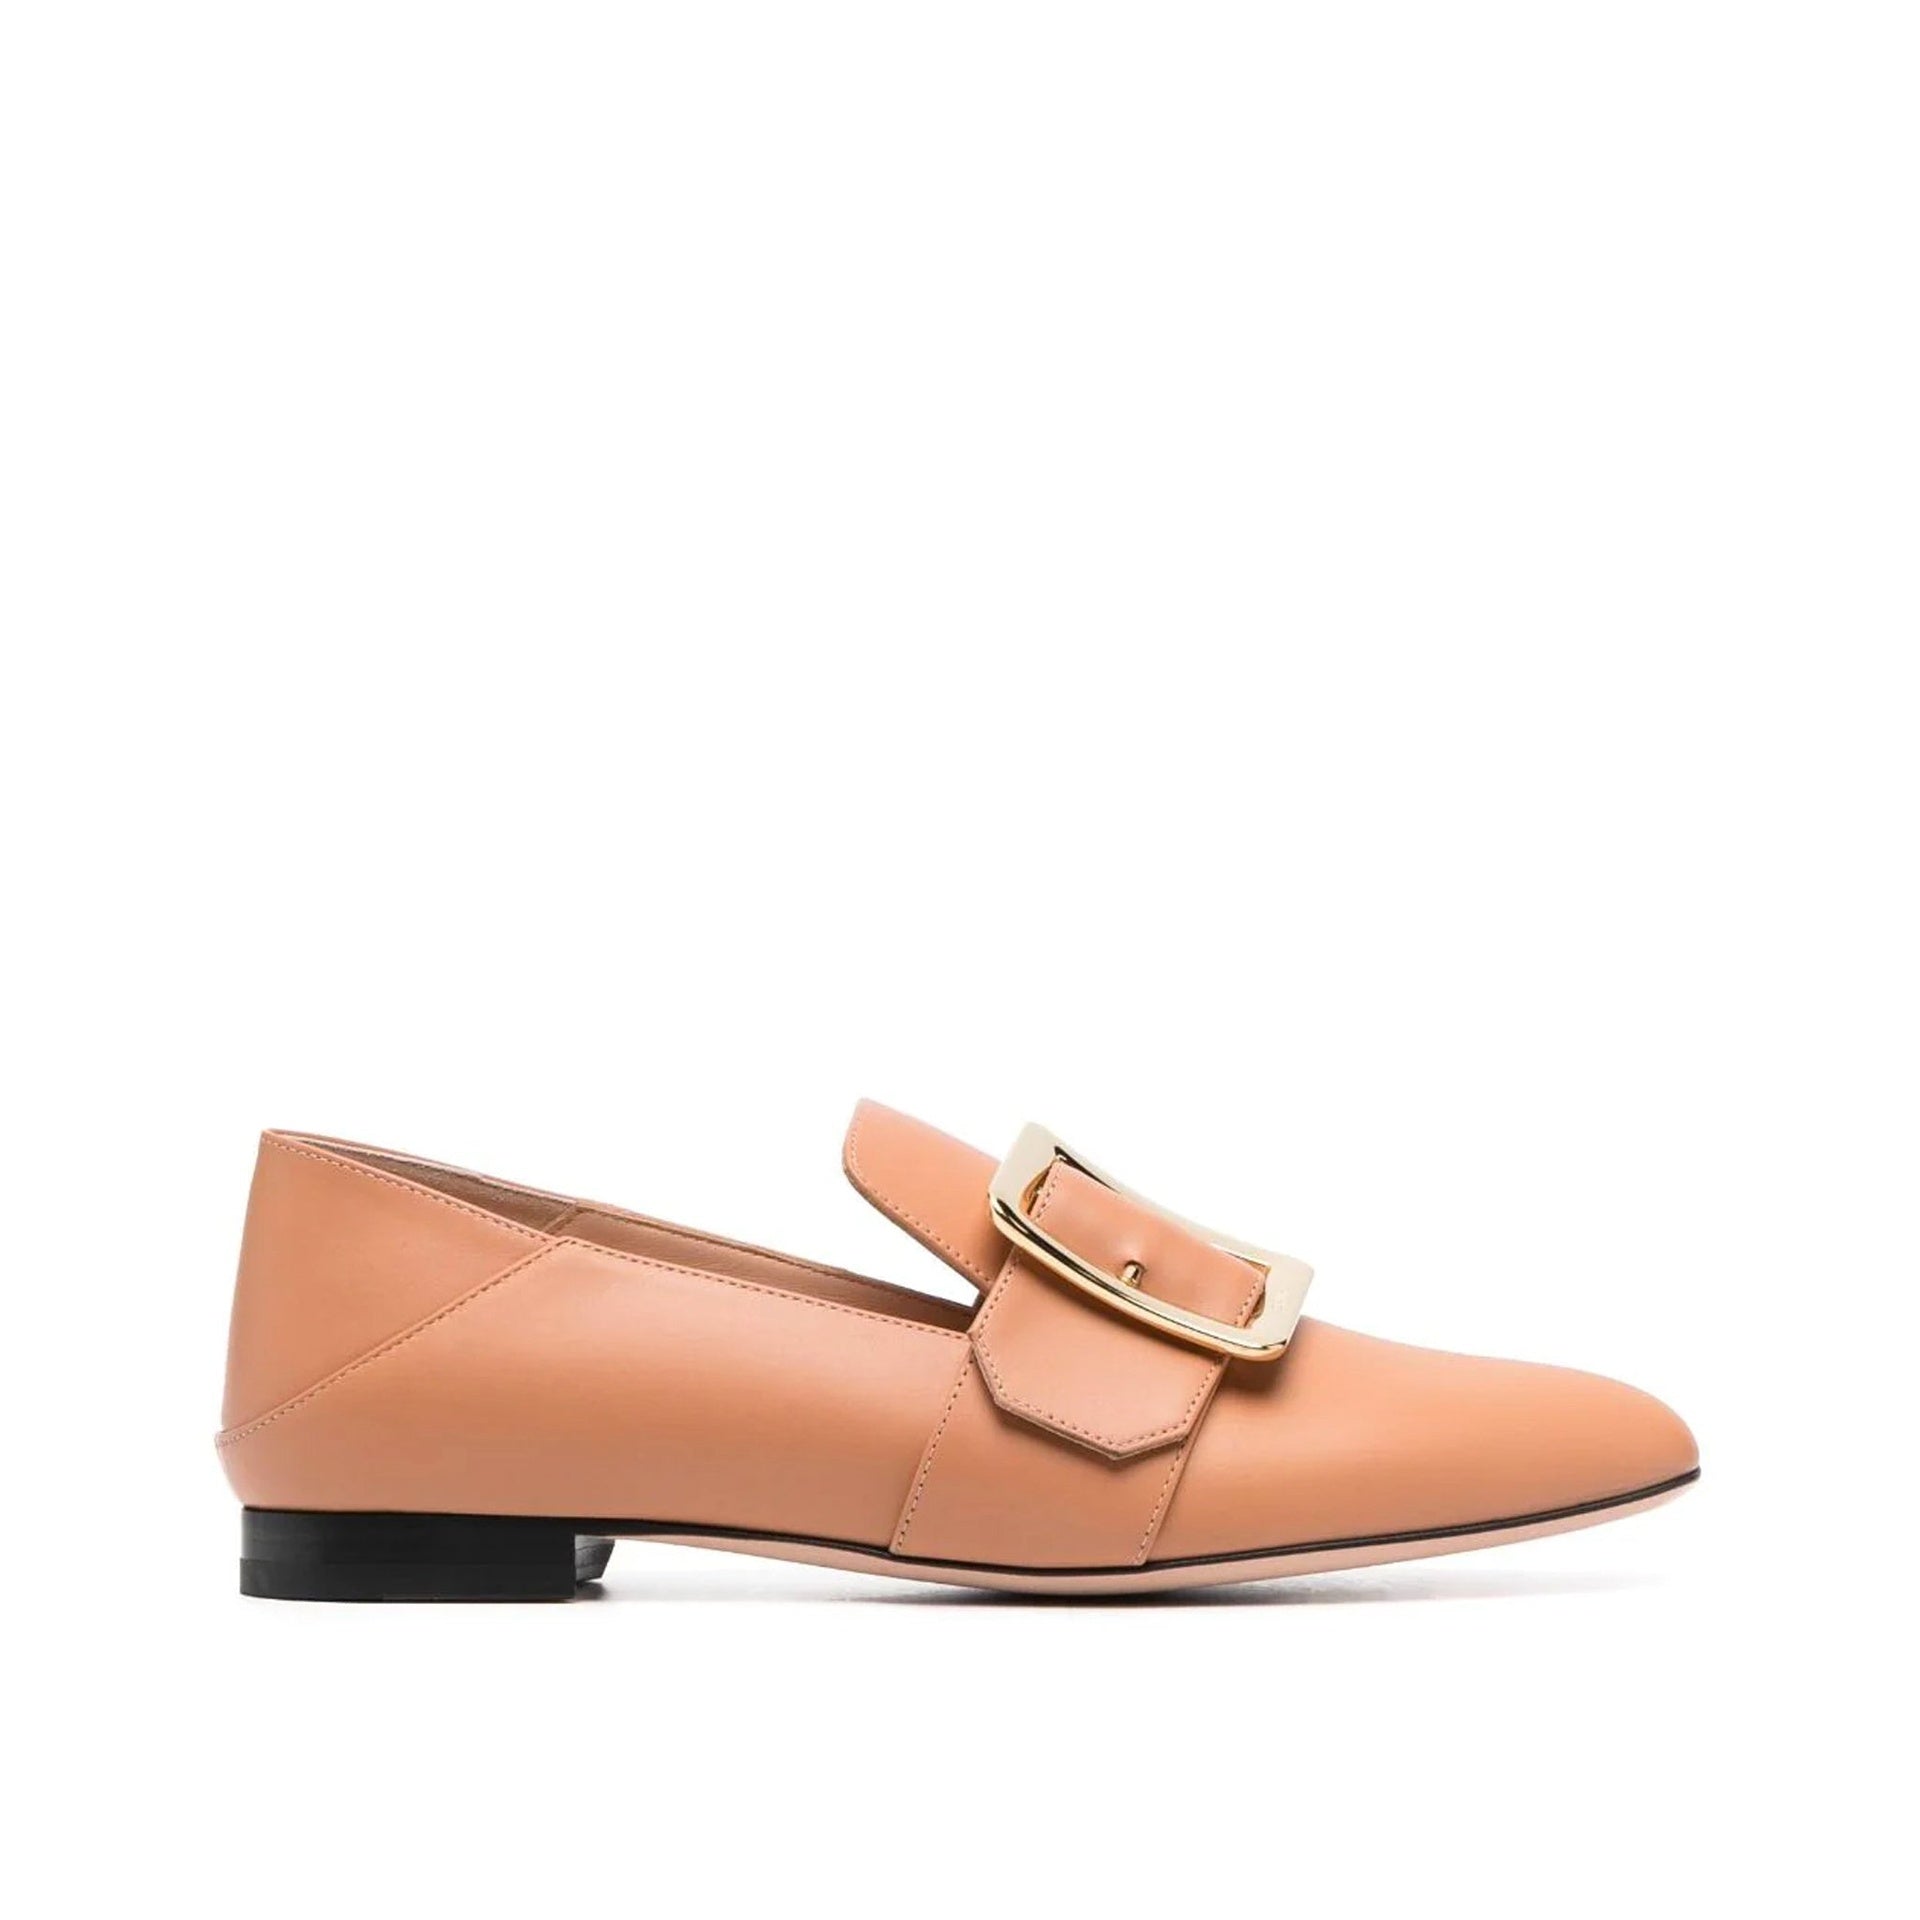 BALLY-OUTLET-SALE-Bally-Leather-Loafers-Halbschuhe-NUDE-35_5-ARCHIVE-COLLECTION.jpg